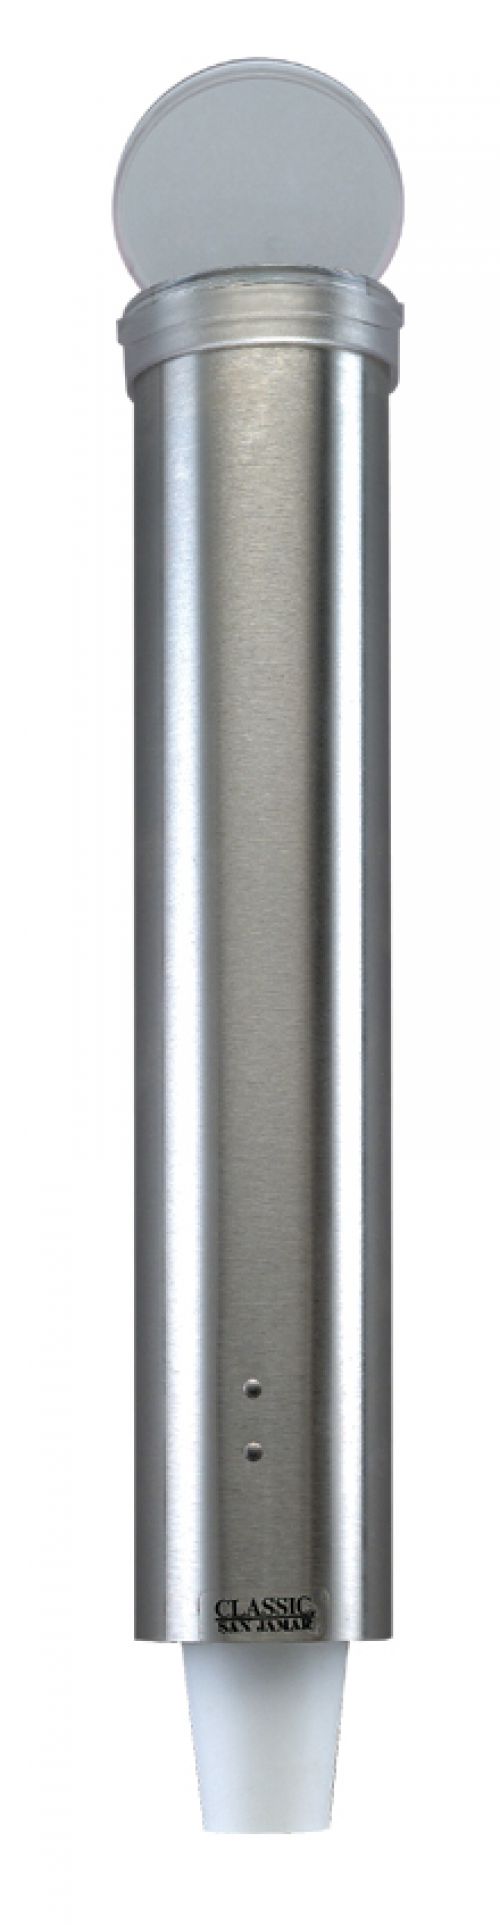 San Jamar 3-5oz Cup Dispenser Pull-type Stainless Each Pack 1 / EA